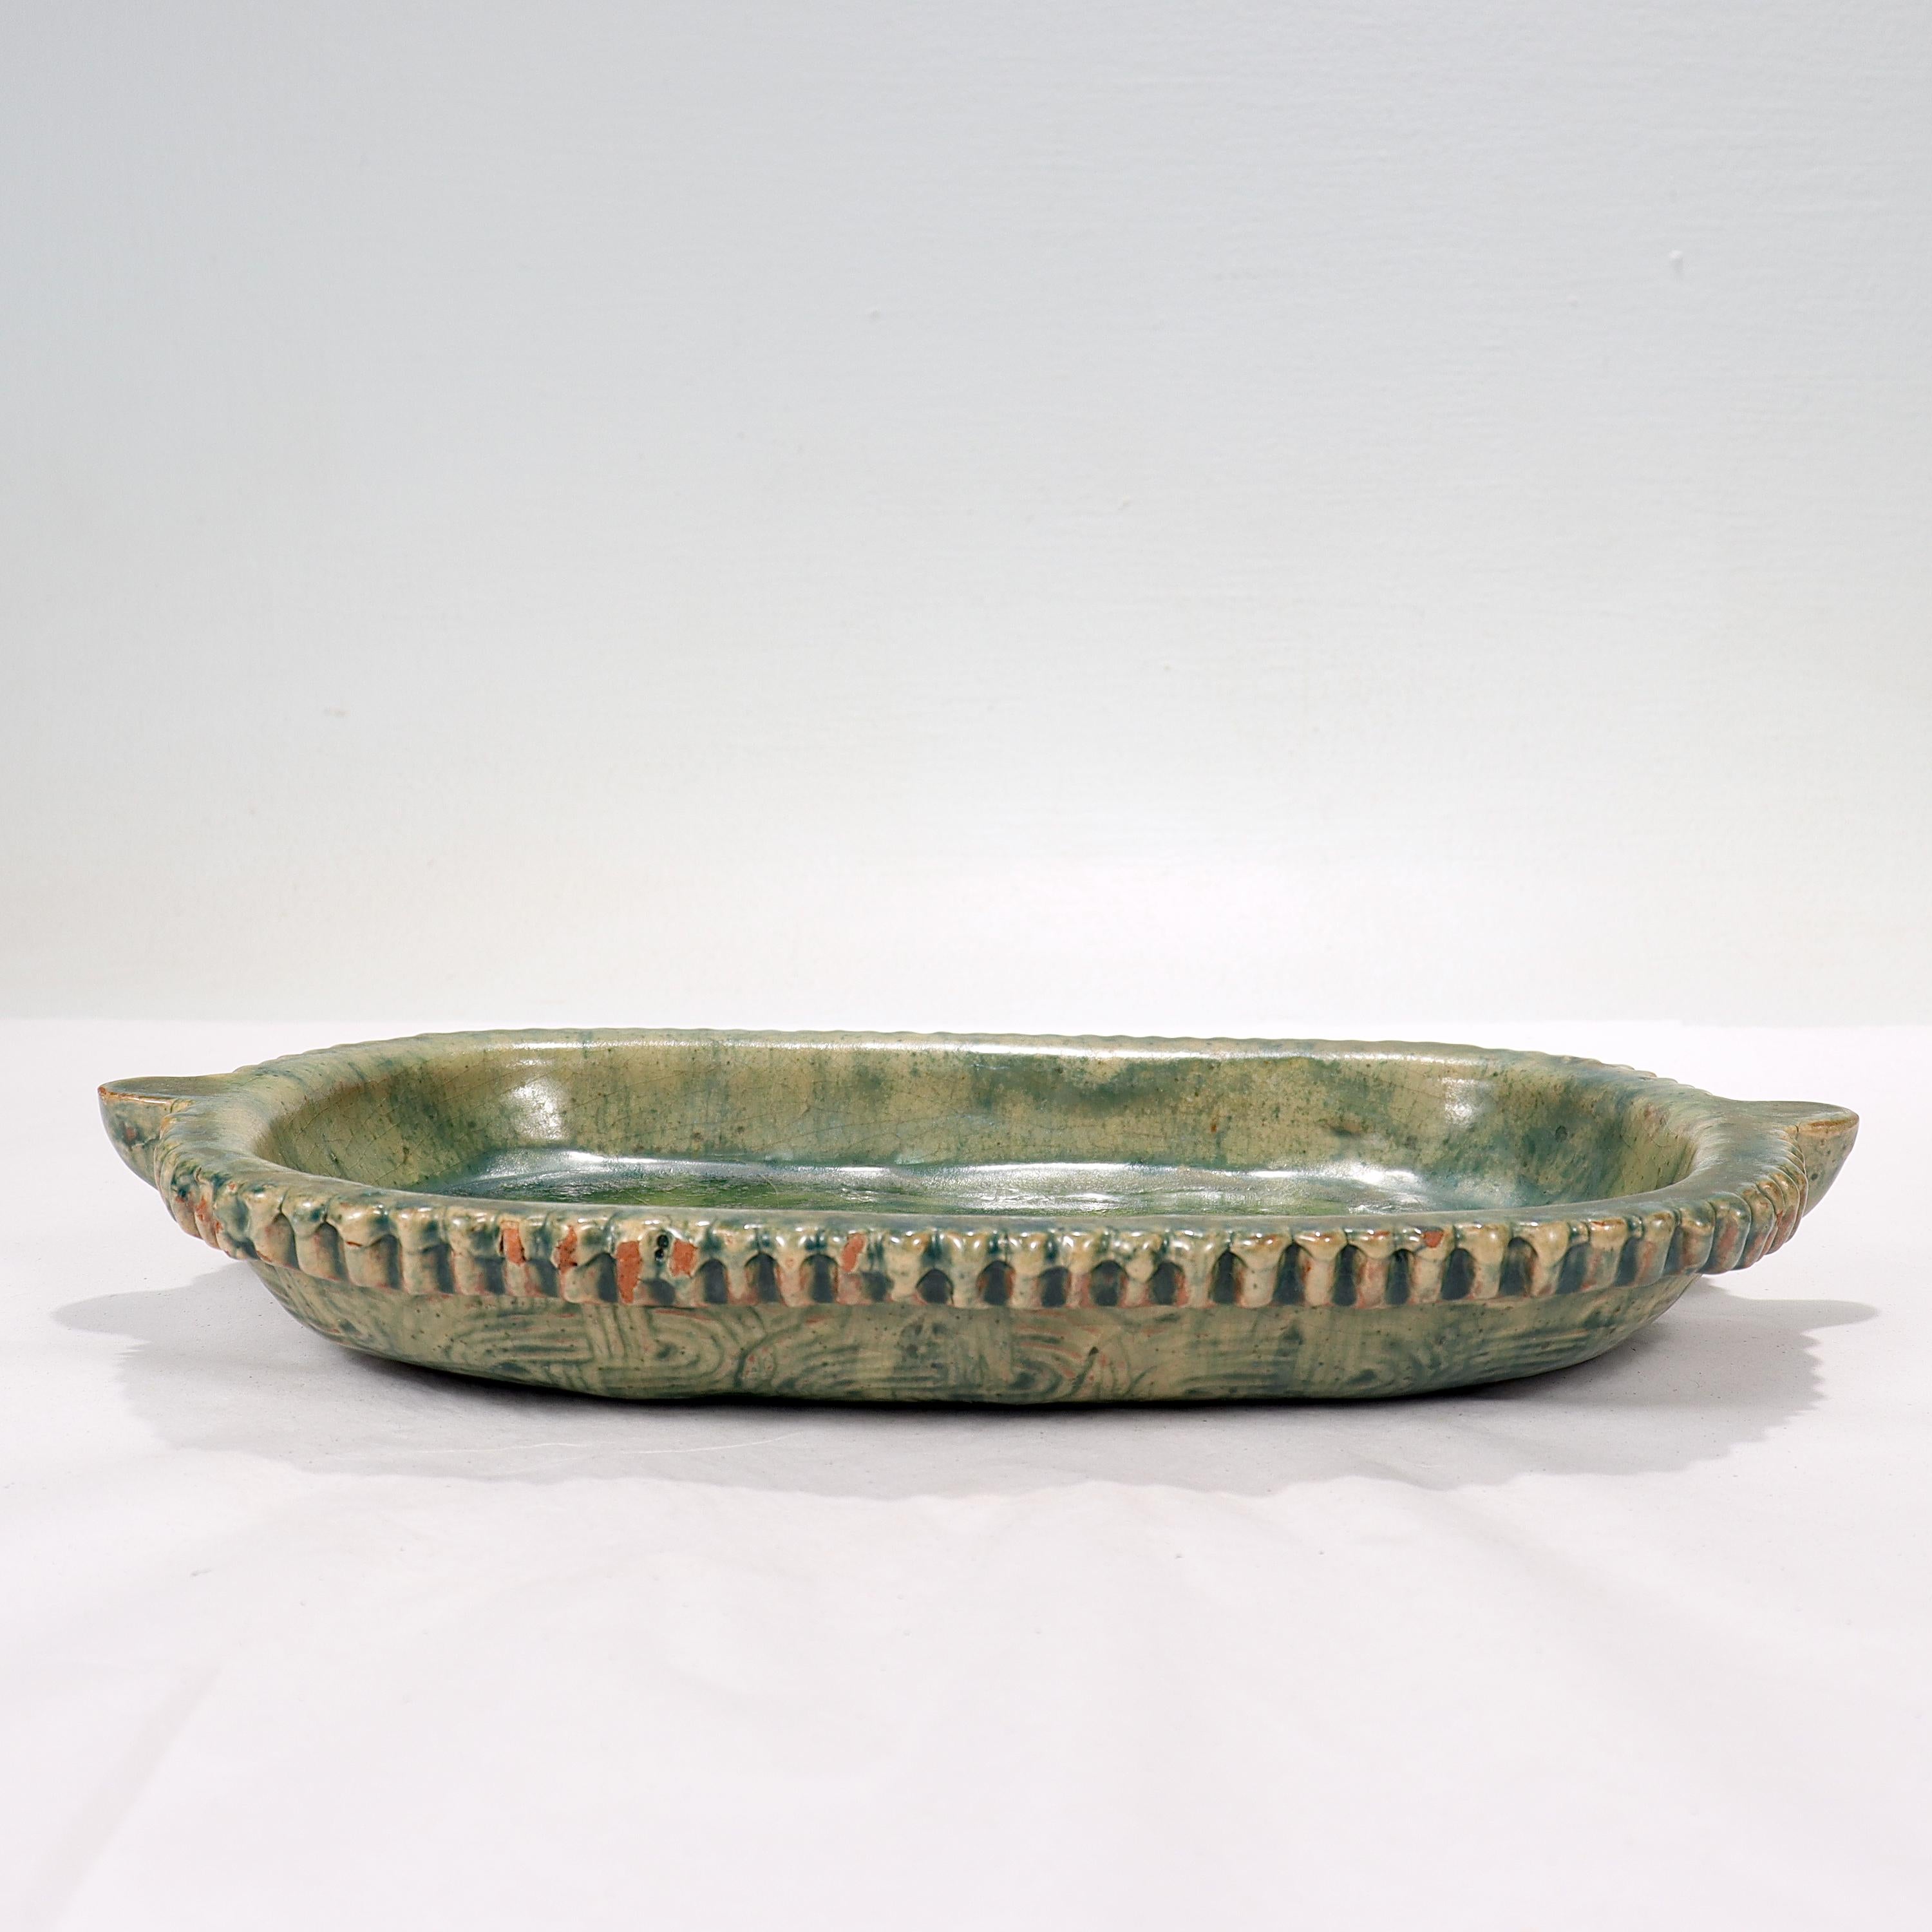 20th Century Rare Moravian Pottery Works / Mercer Tile Company Low Bowl or Oblong Plate For Sale